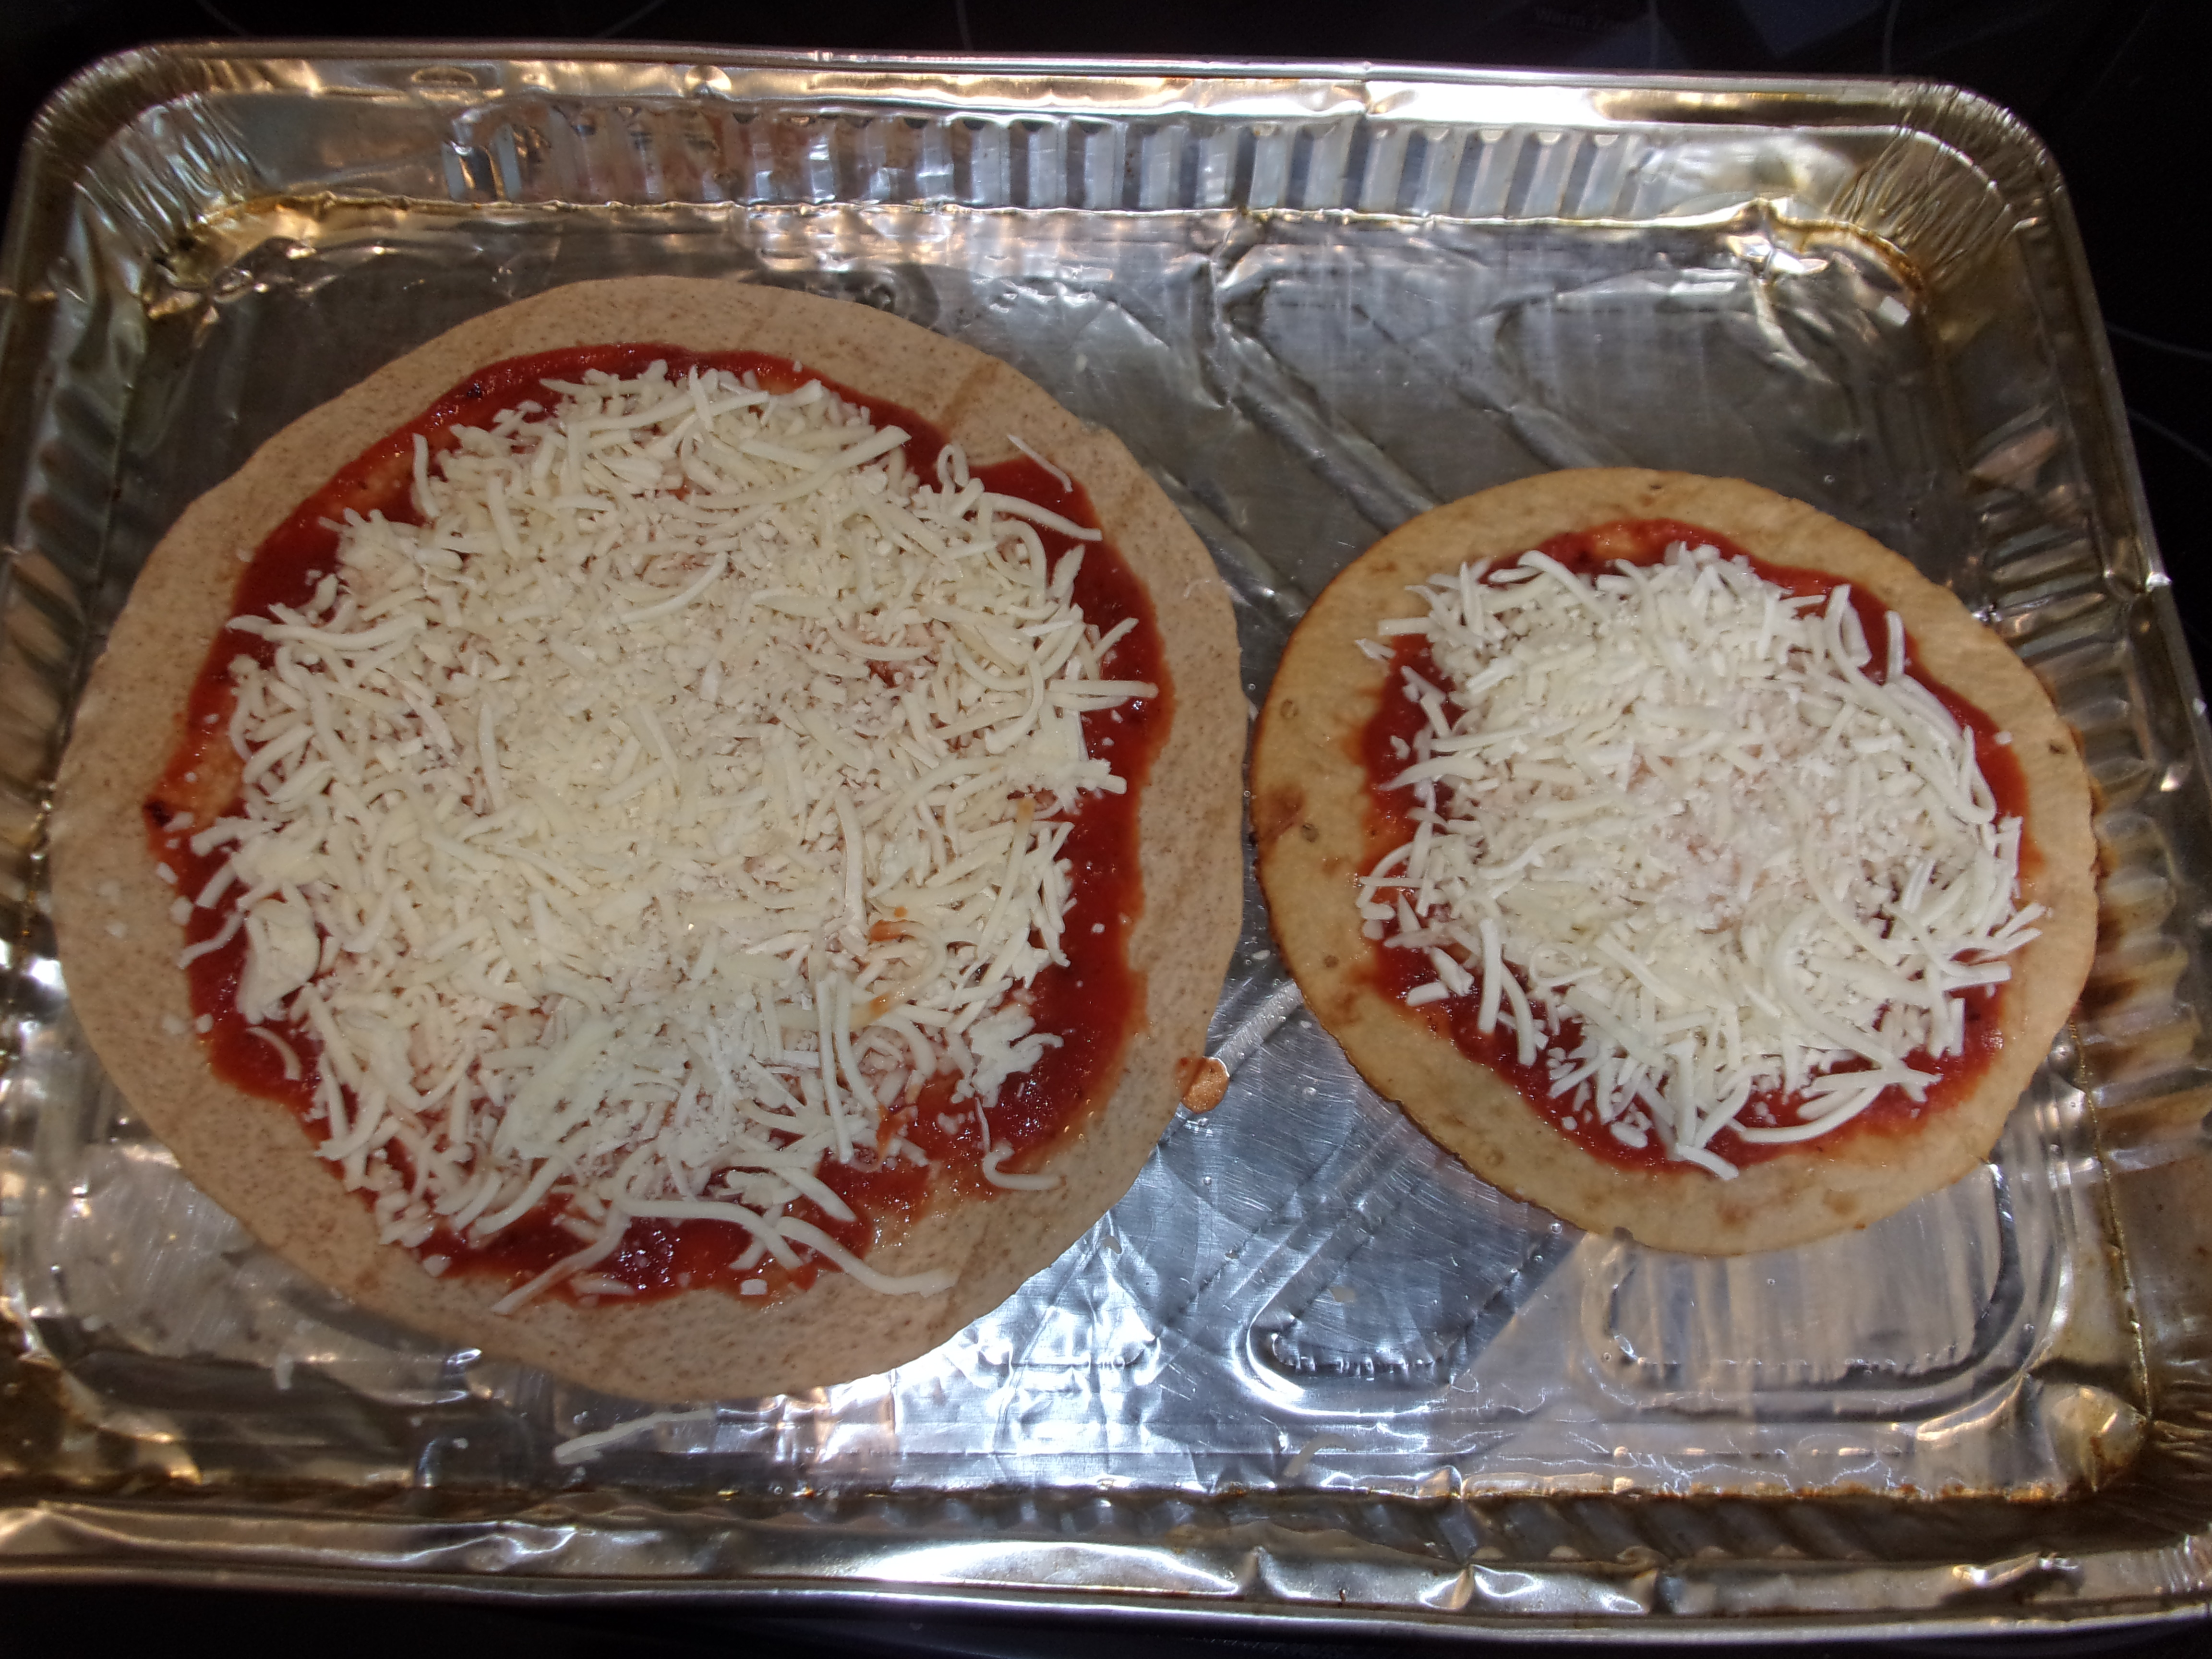 two different pizza bases on foil: one is a tortilla, one is a mini pizza crust. both have red sauce and shredded cheese spread across them